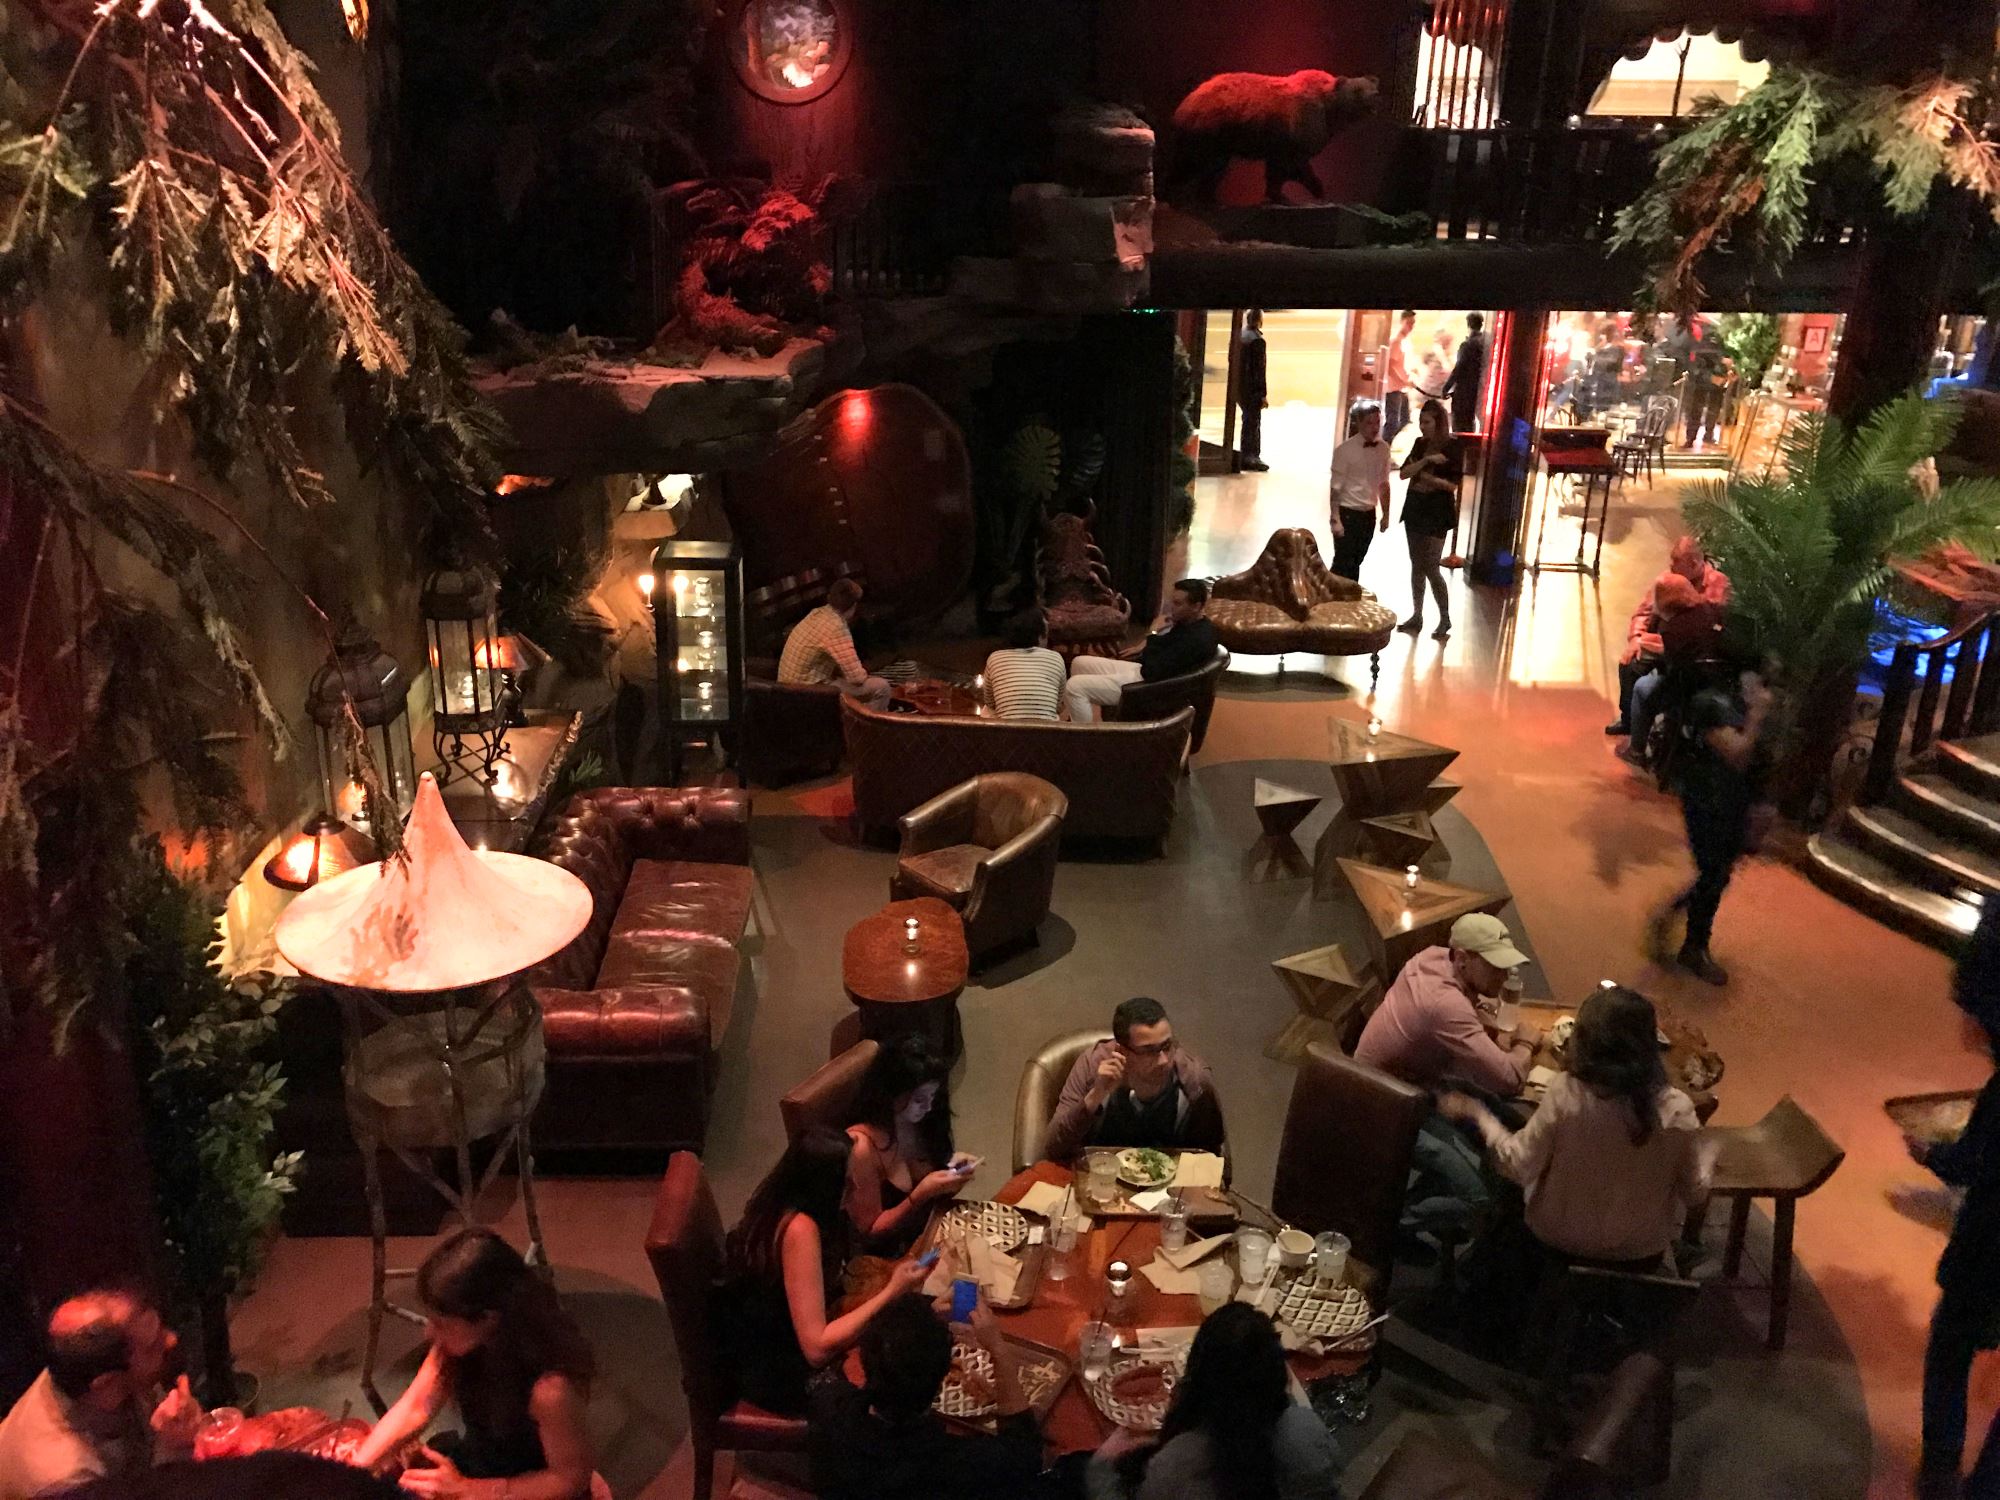 The first floor of Clifton's Cafeteria